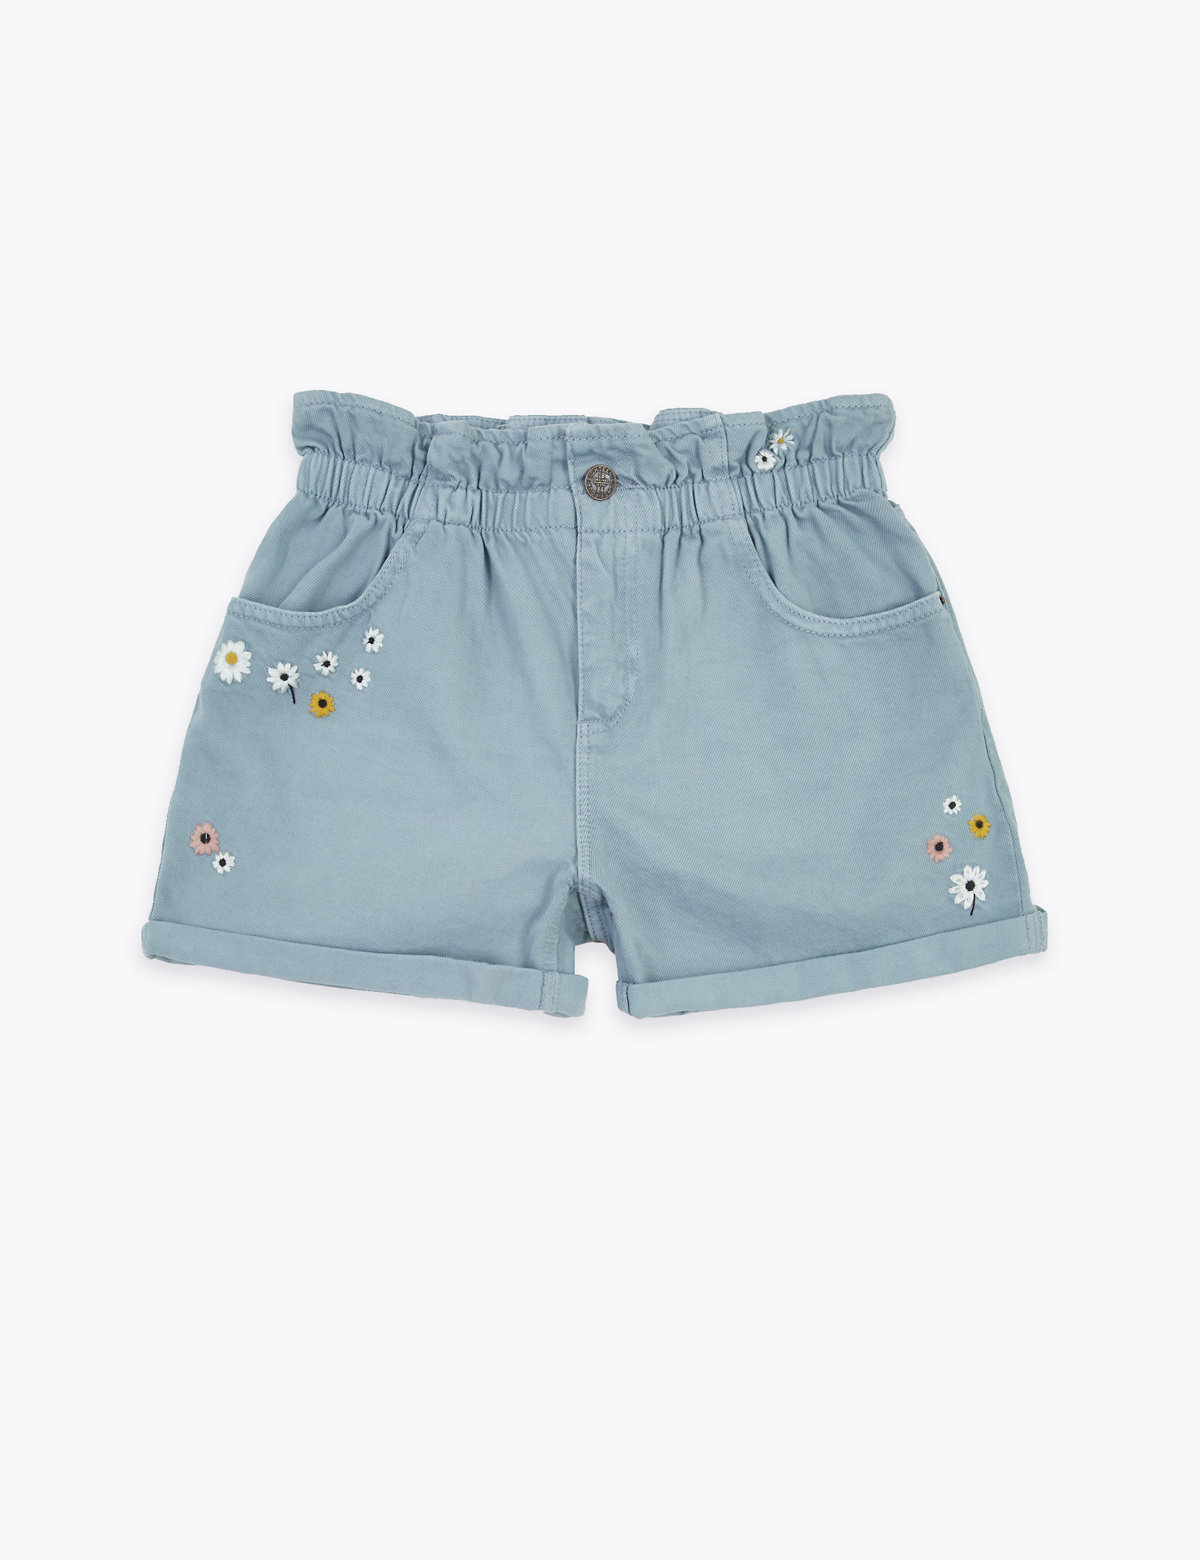 Denim Floral Embroidered Shorts (6-16 Yrs)